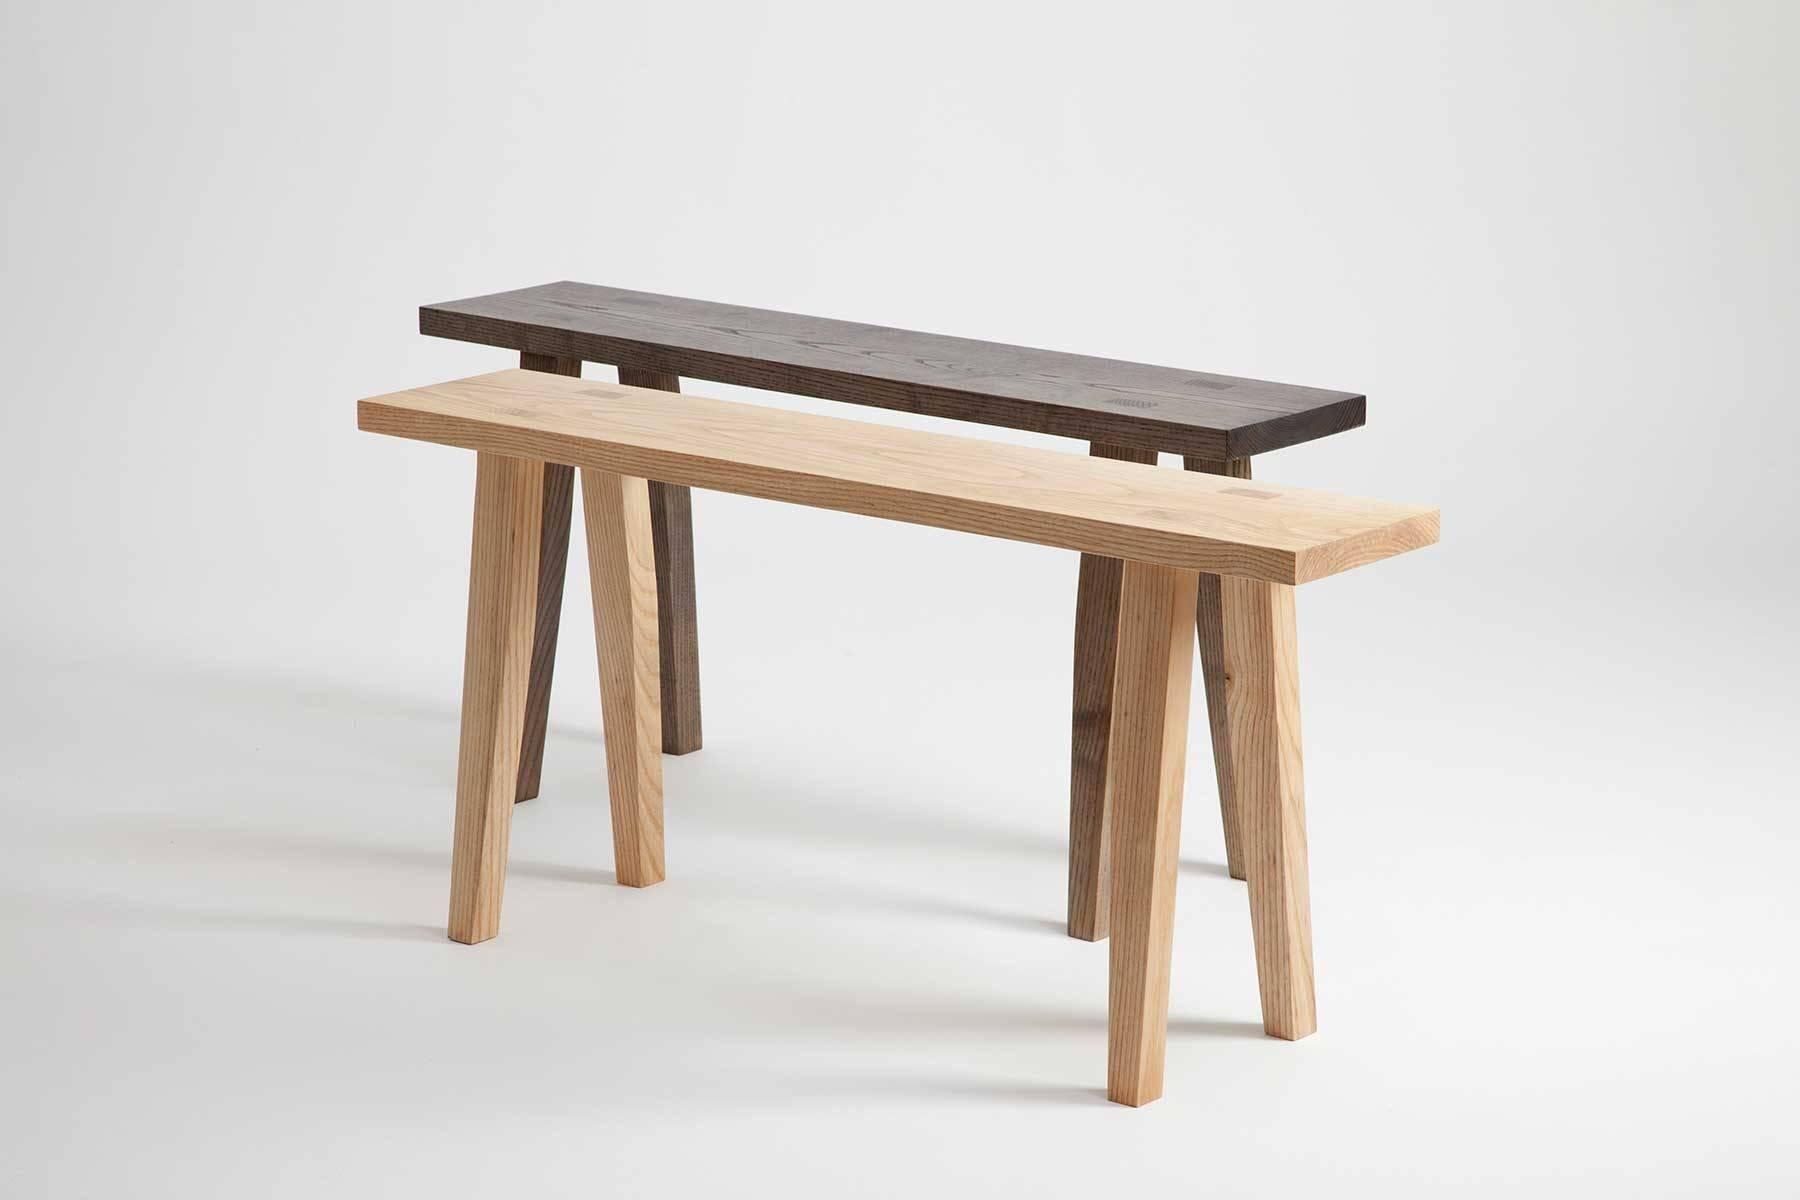 Japanese Joinery and Shaker-inspired lines with distinctly Dane Co. design.